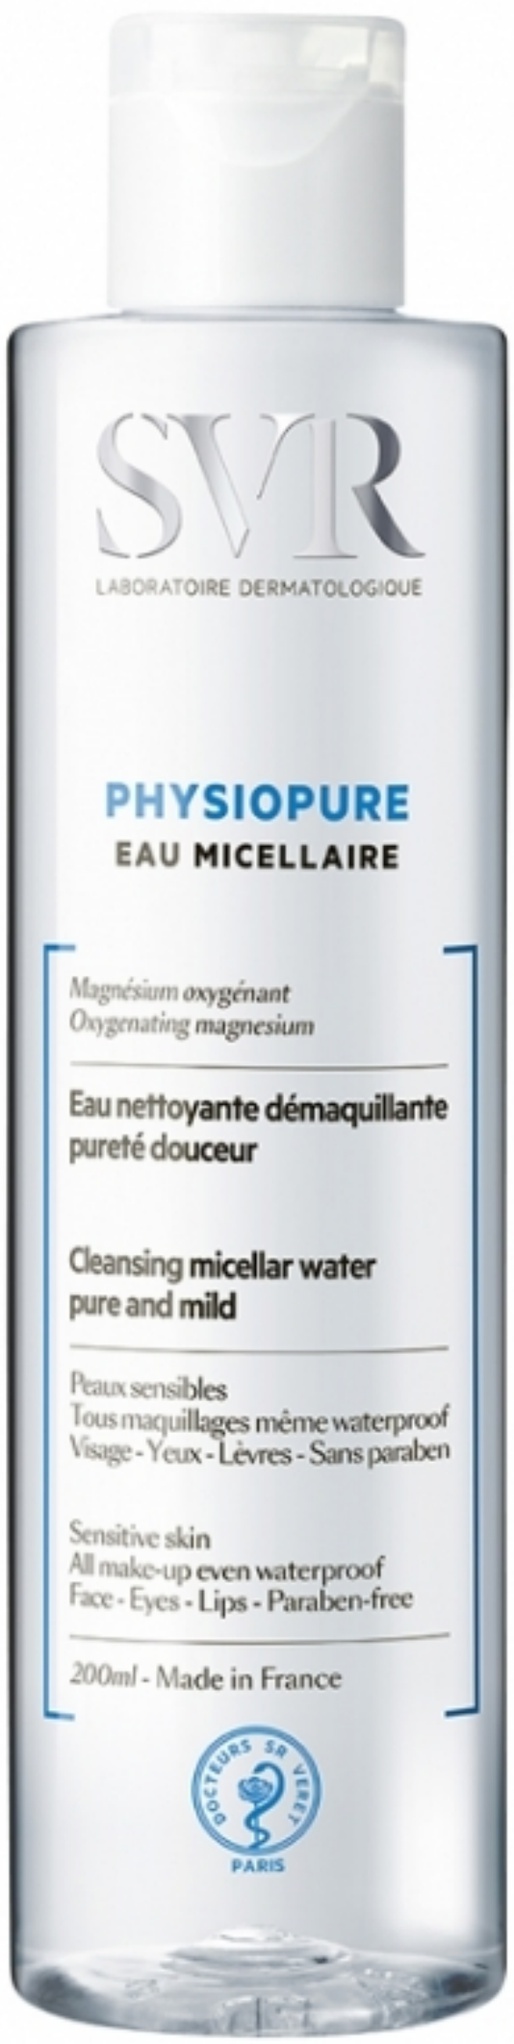 SVR laboratoire dermatologique Physiopure Water Micellar Water Cleanser Cleansing Purity Smooth